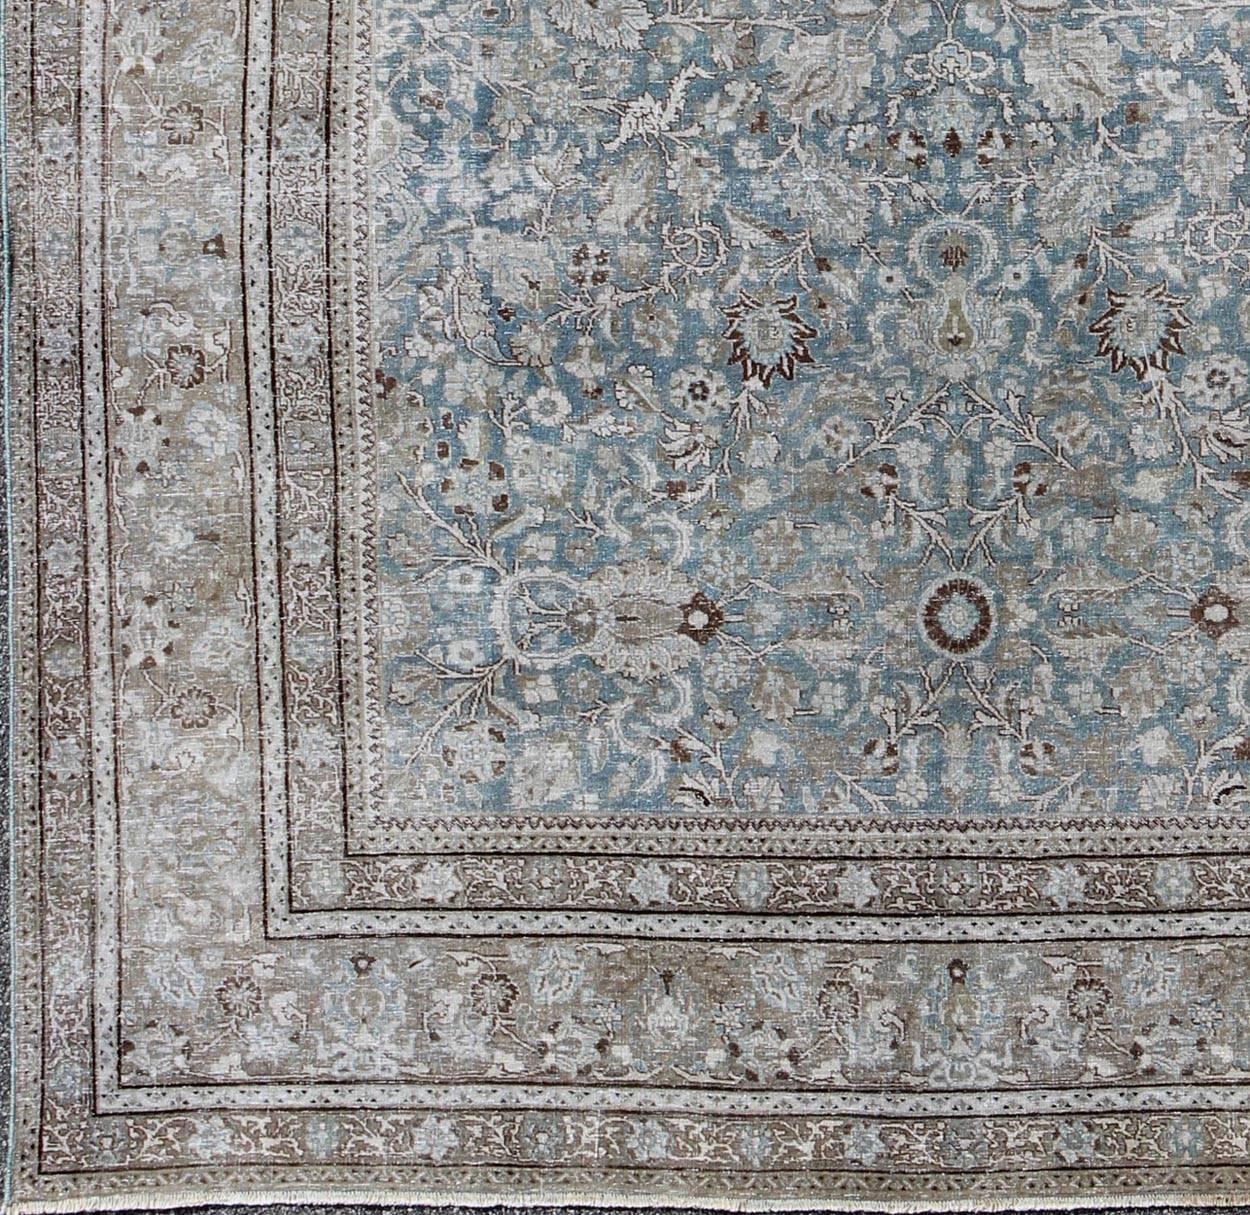 Square antique Persian Tabriz in grey, blue and brown with floral design, rug ema-7505, country of origin / type: Iran / Tabriz, circa 1910

This antique Persian Tabriz carpet (circa 1910) features a refined palate of grey, blue, and brown tones